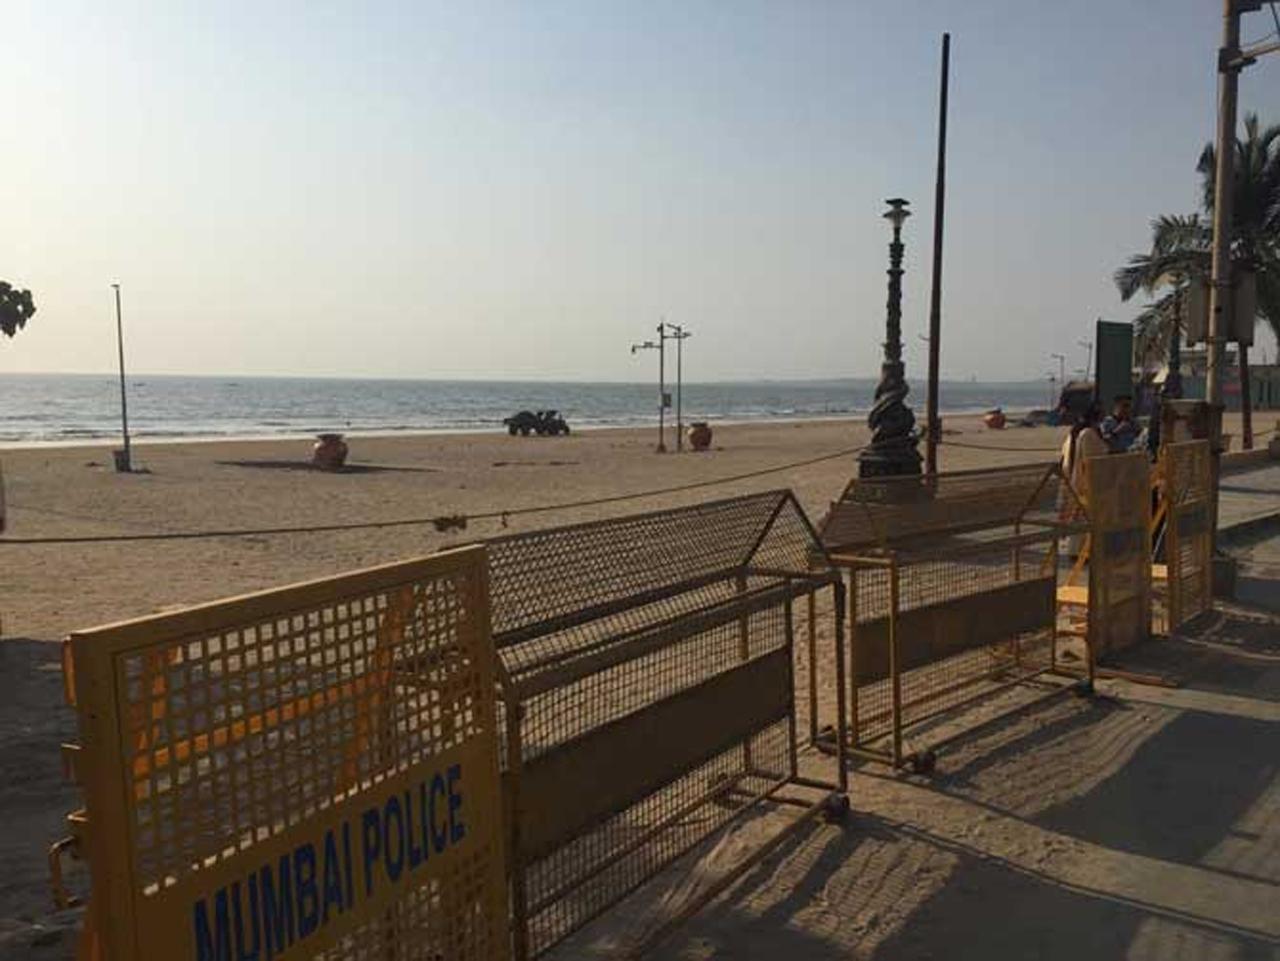 Mumbai's iconic Juhu beach was shut down for tourists and visitors following the COVID-19 outbreak in March last year. The Mumbai Police placed barricades to restrict people from entering the beach